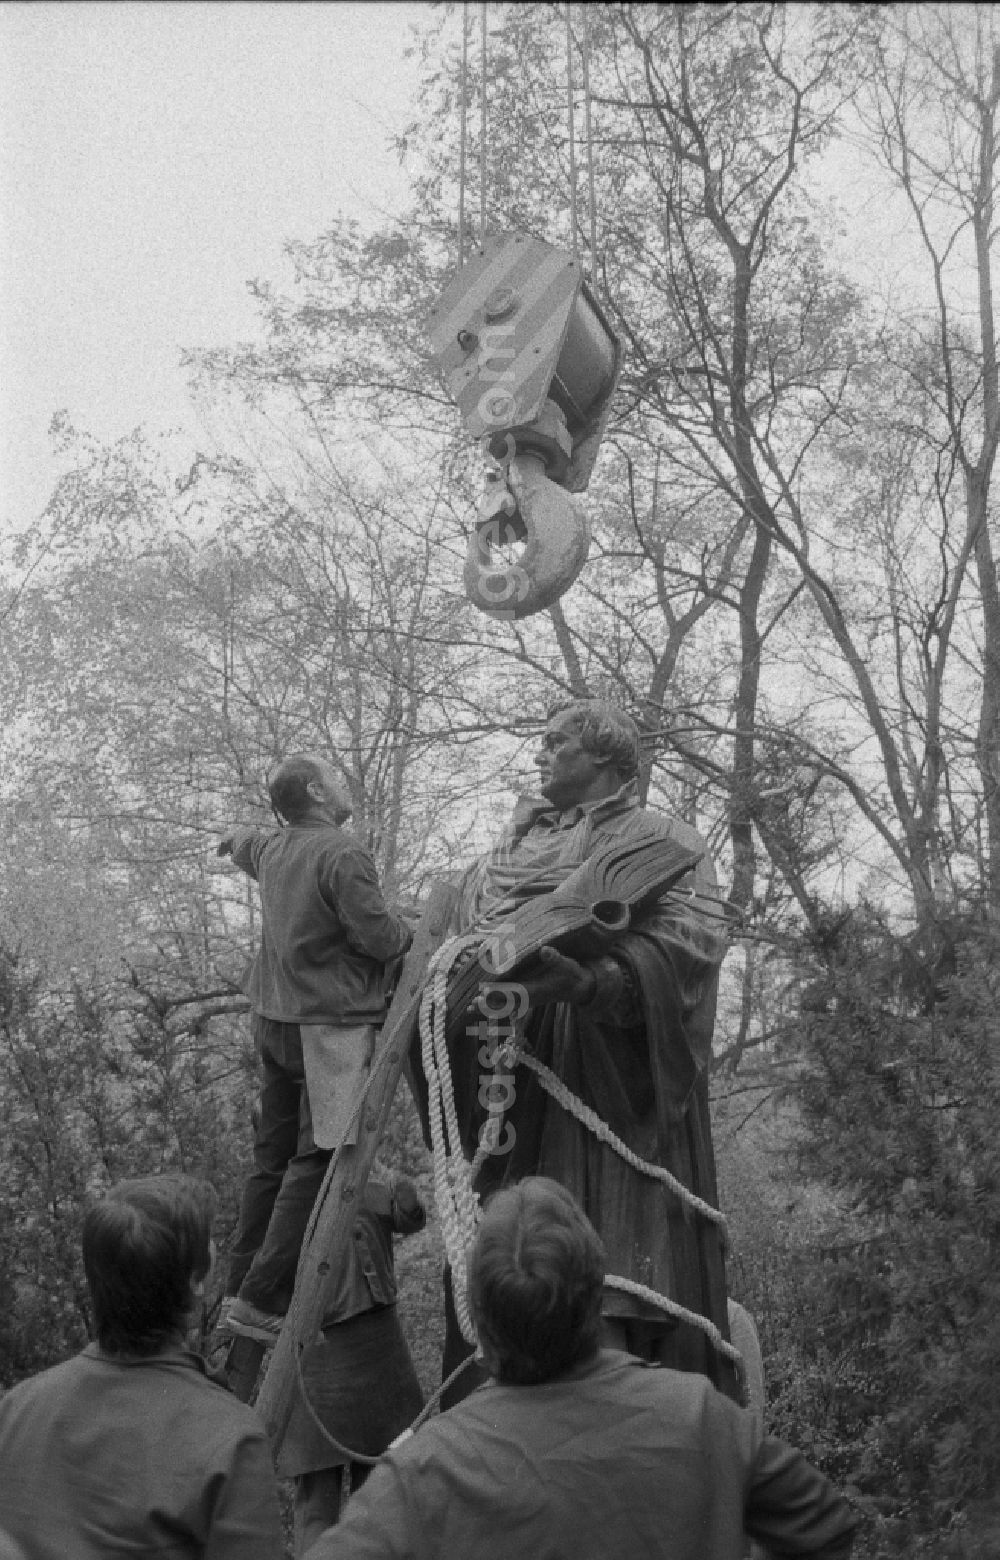 GDR image archive: Berlin - Sculpture of the Martin Luther Monument during the re-erection on Karl-Liebknecht-Strasse in the Mitte district of East Berlin in the area of the former GDR, German Democratic Republic